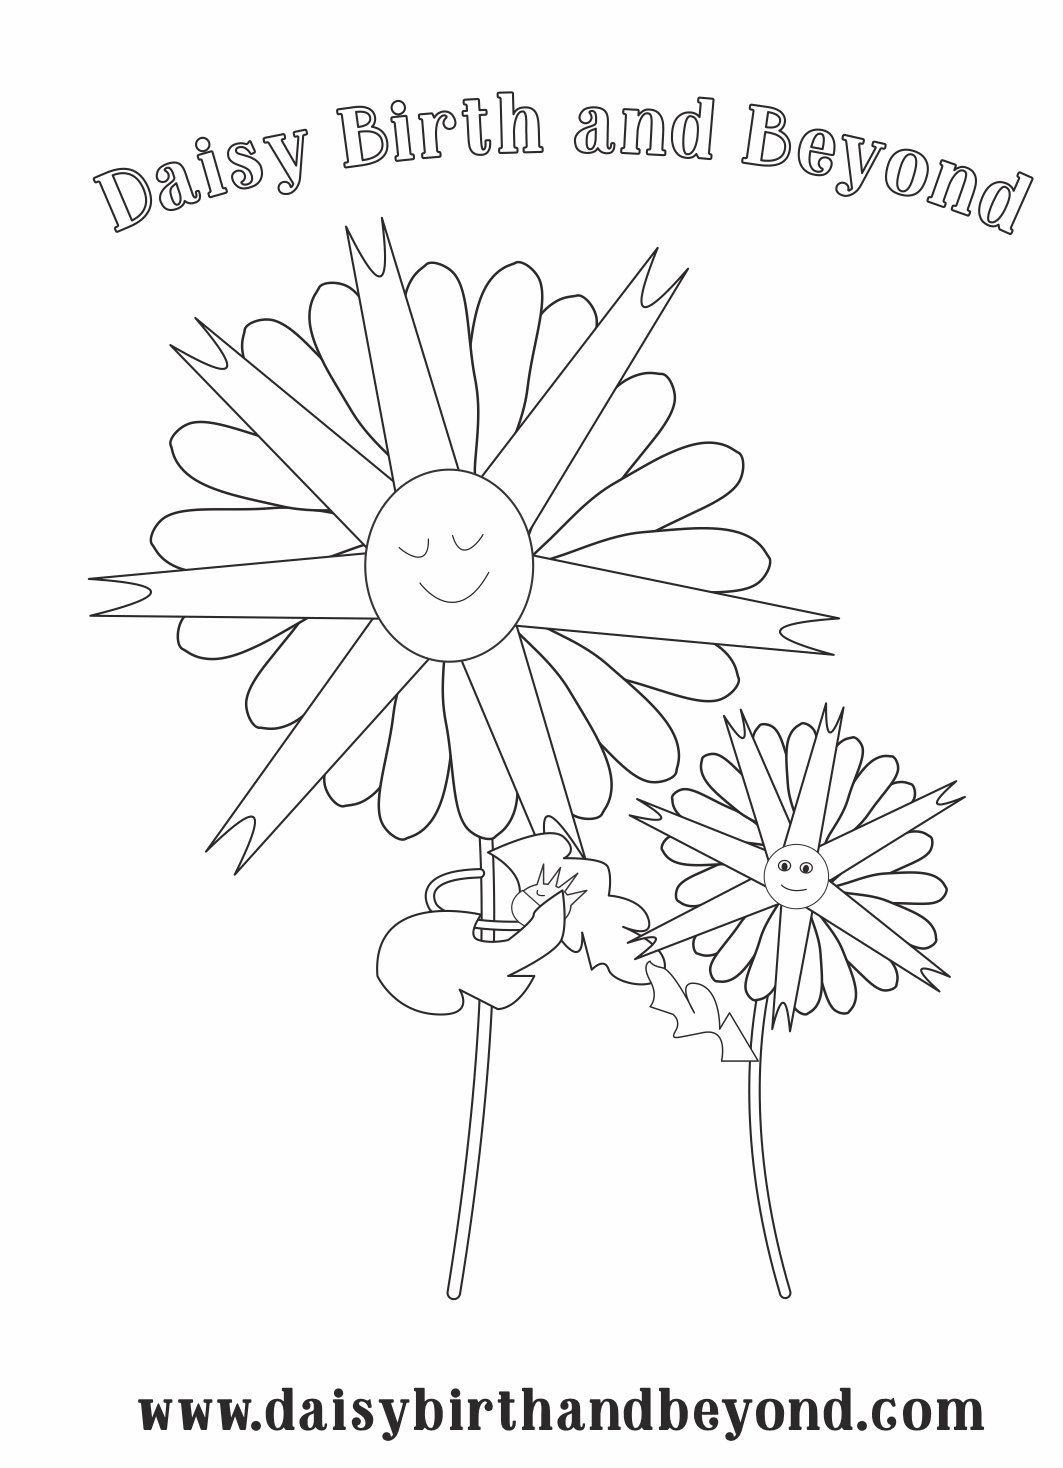 Daisy Birth and Beyond Coloring Page